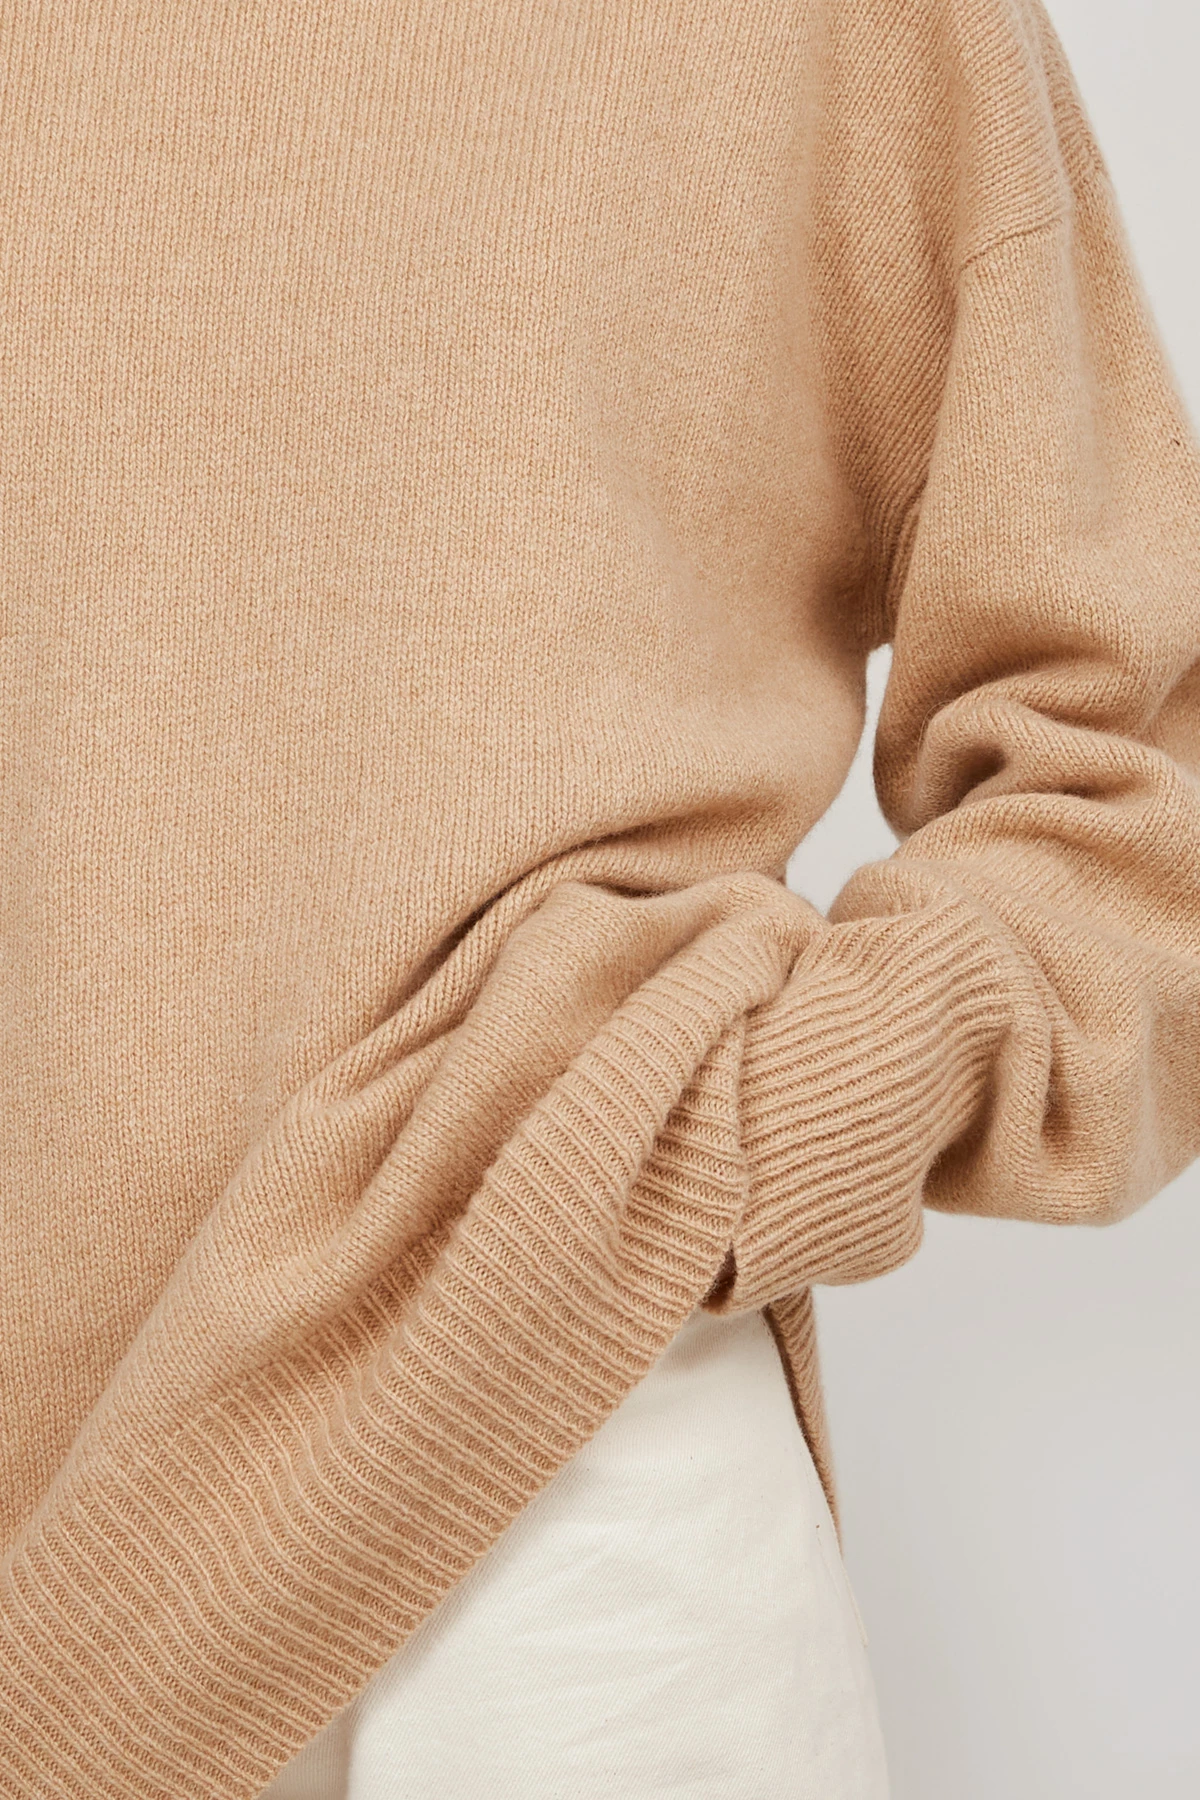 Cashmere beige knitted oversized sweater, photo 2